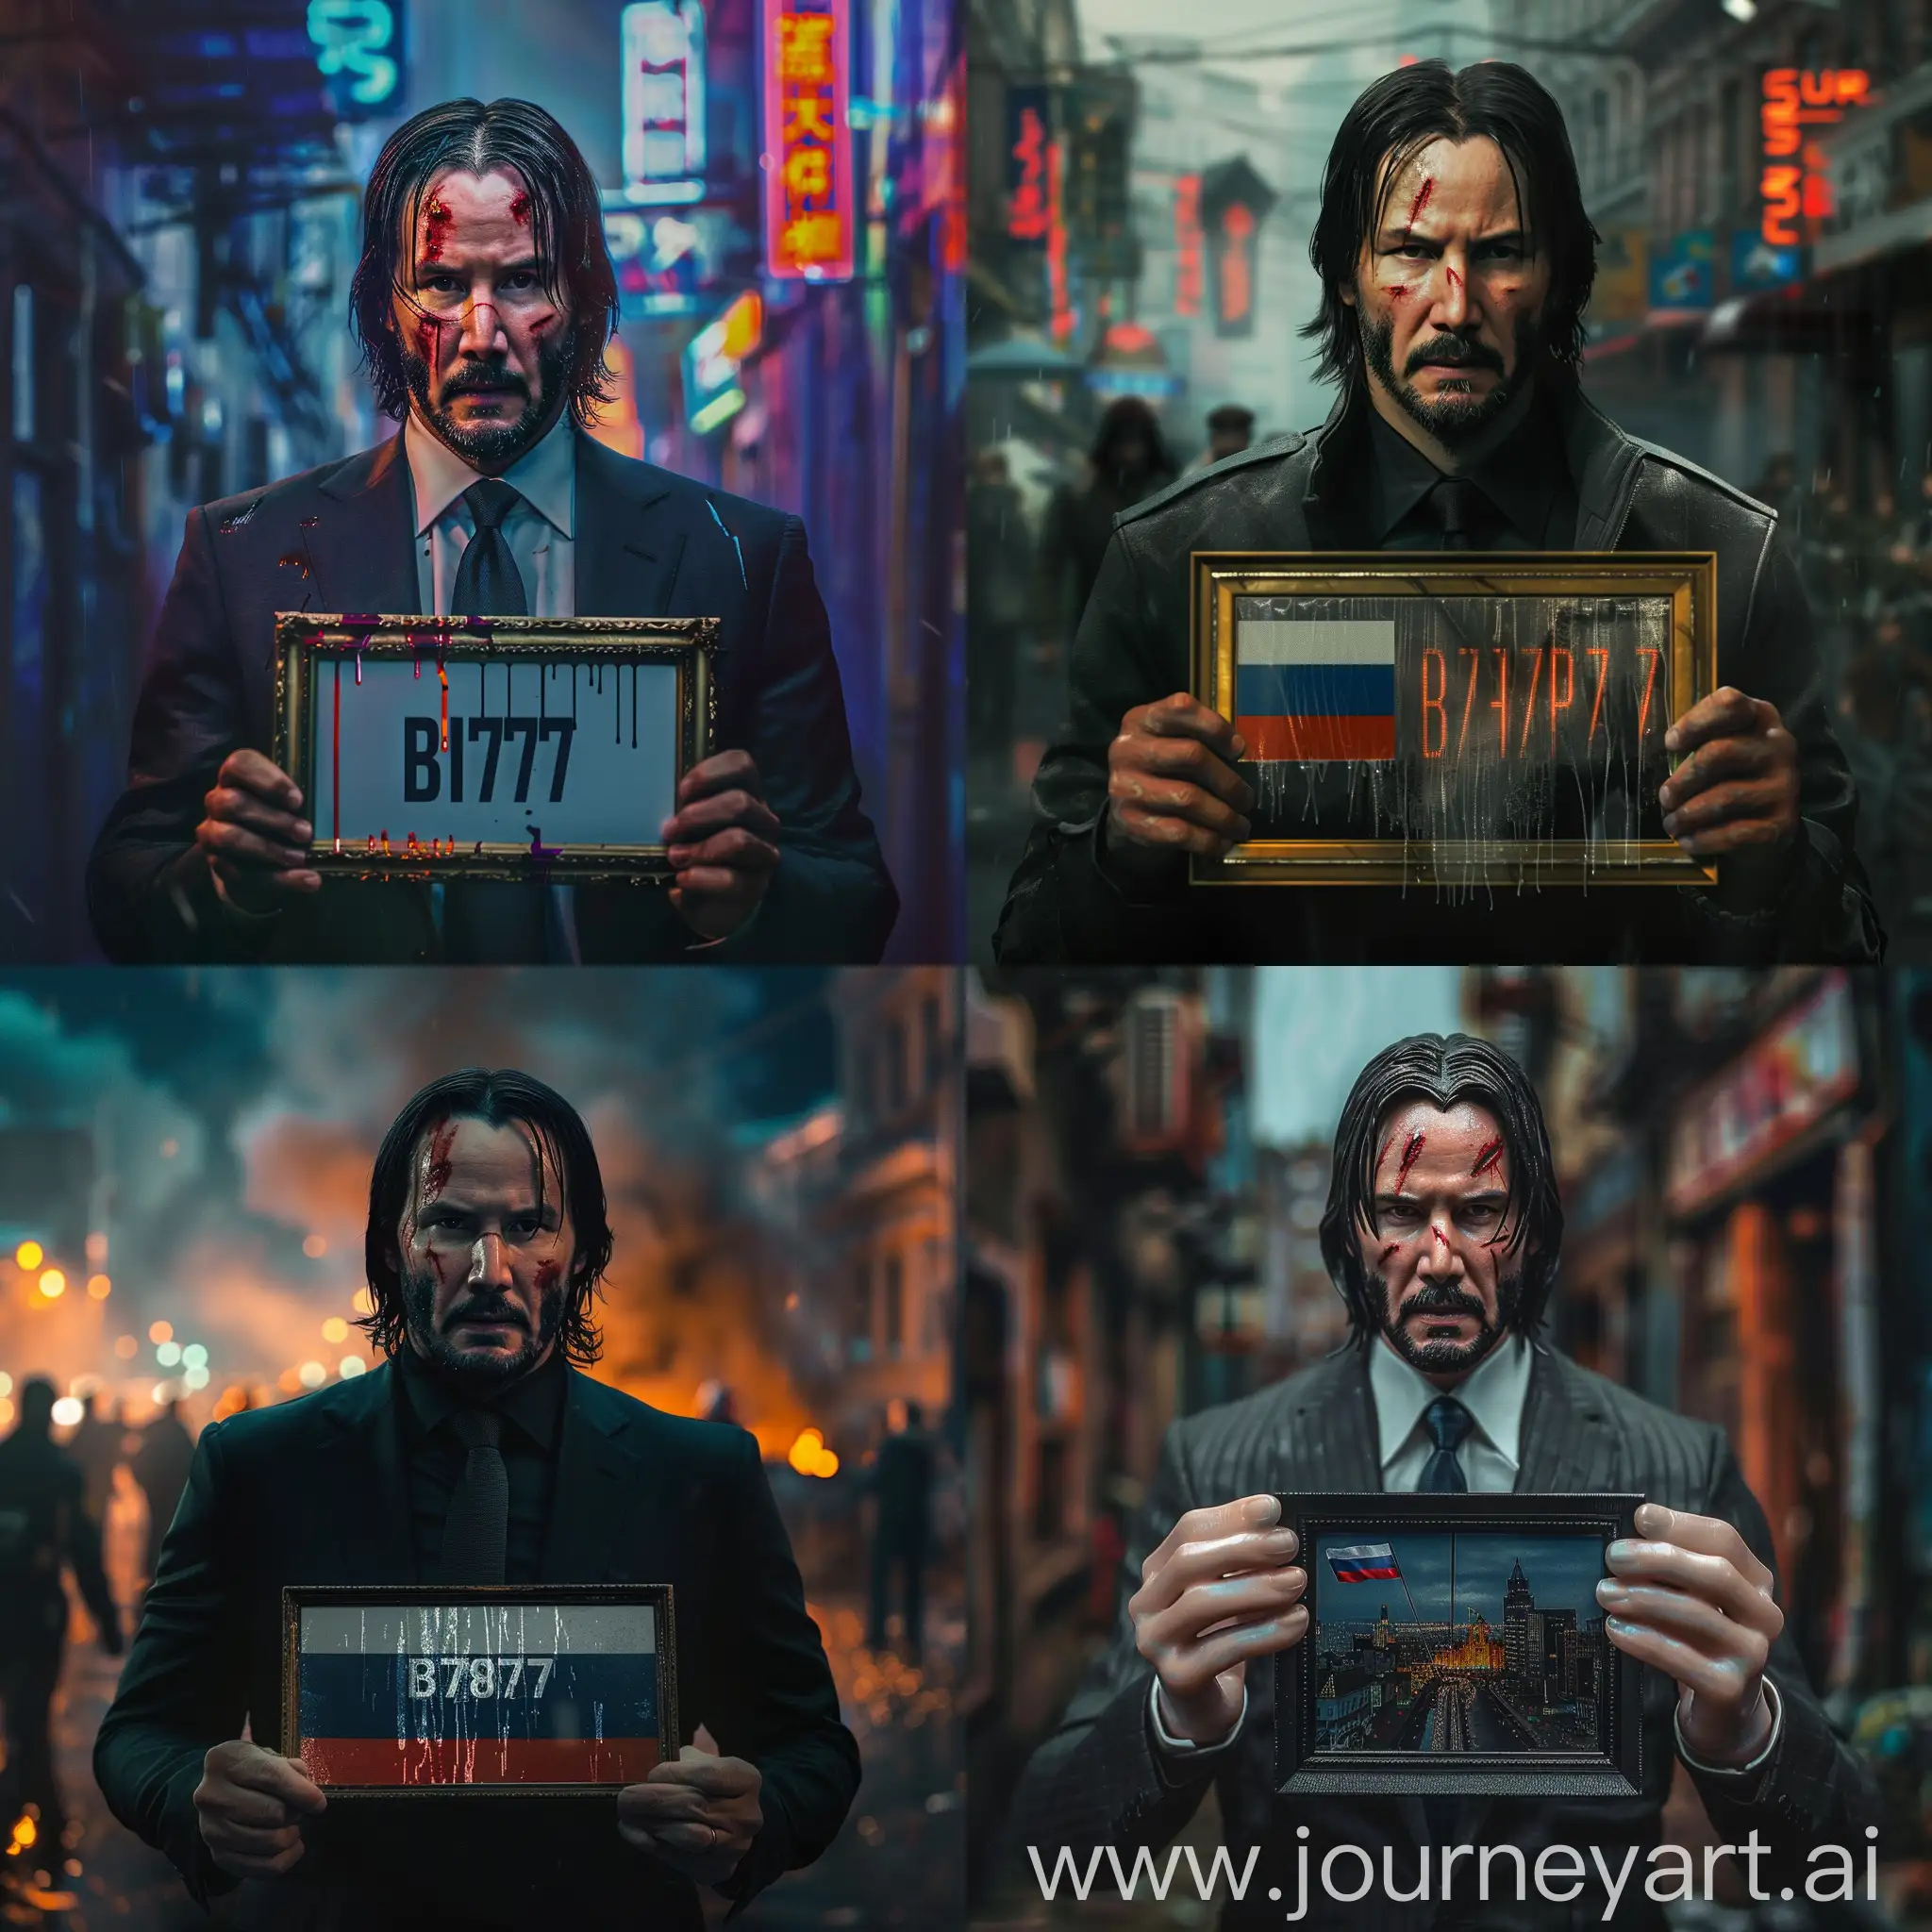 John-Wick-Holding-Frame-with-B777OP777-Number-and-Russian-Federation-Flag